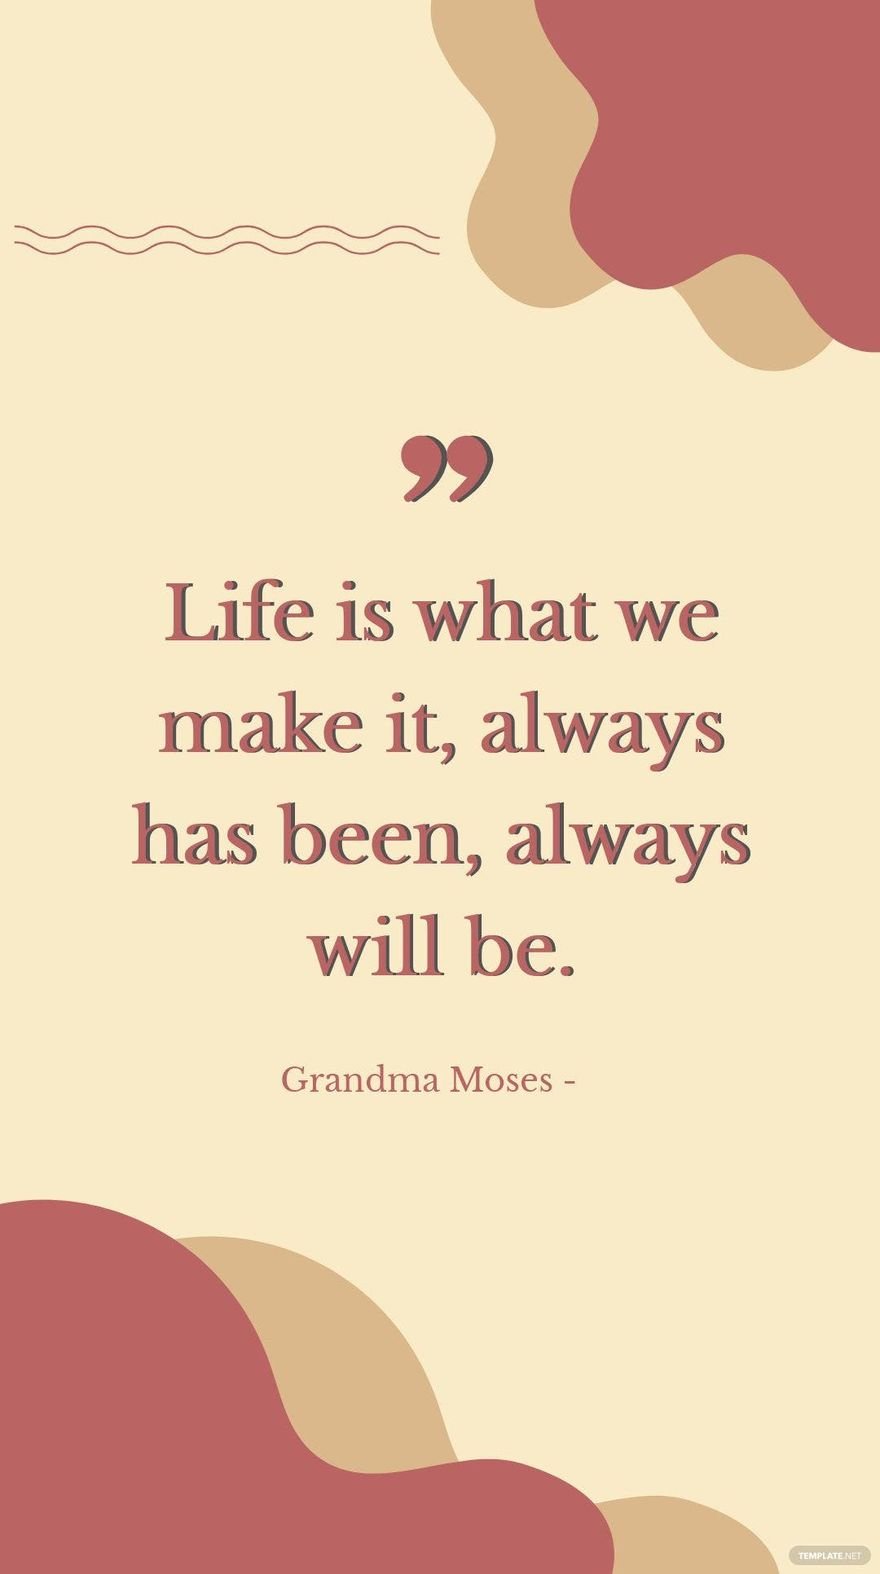 Grandma Moses - Life is what we make it, always has been, always will be.